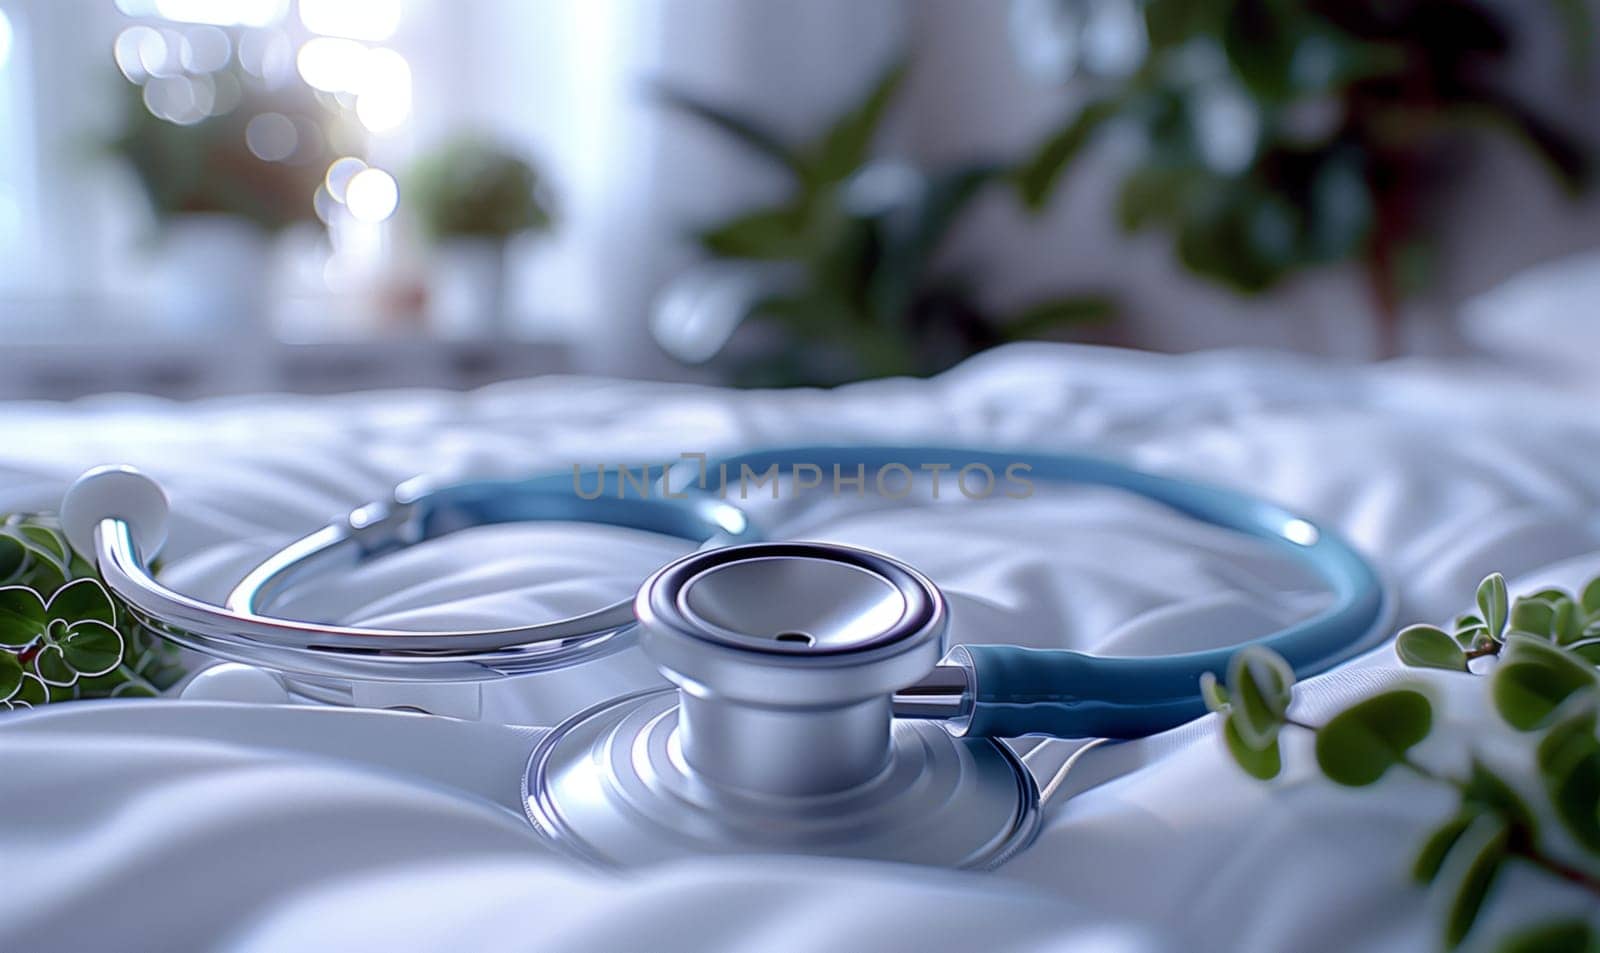 A stethoscope rests on a bed, its electric blue membrane contrasting with the soft blue bedding. The delicate petals of a plant nearby softly touch the transparent material of the stethoscope